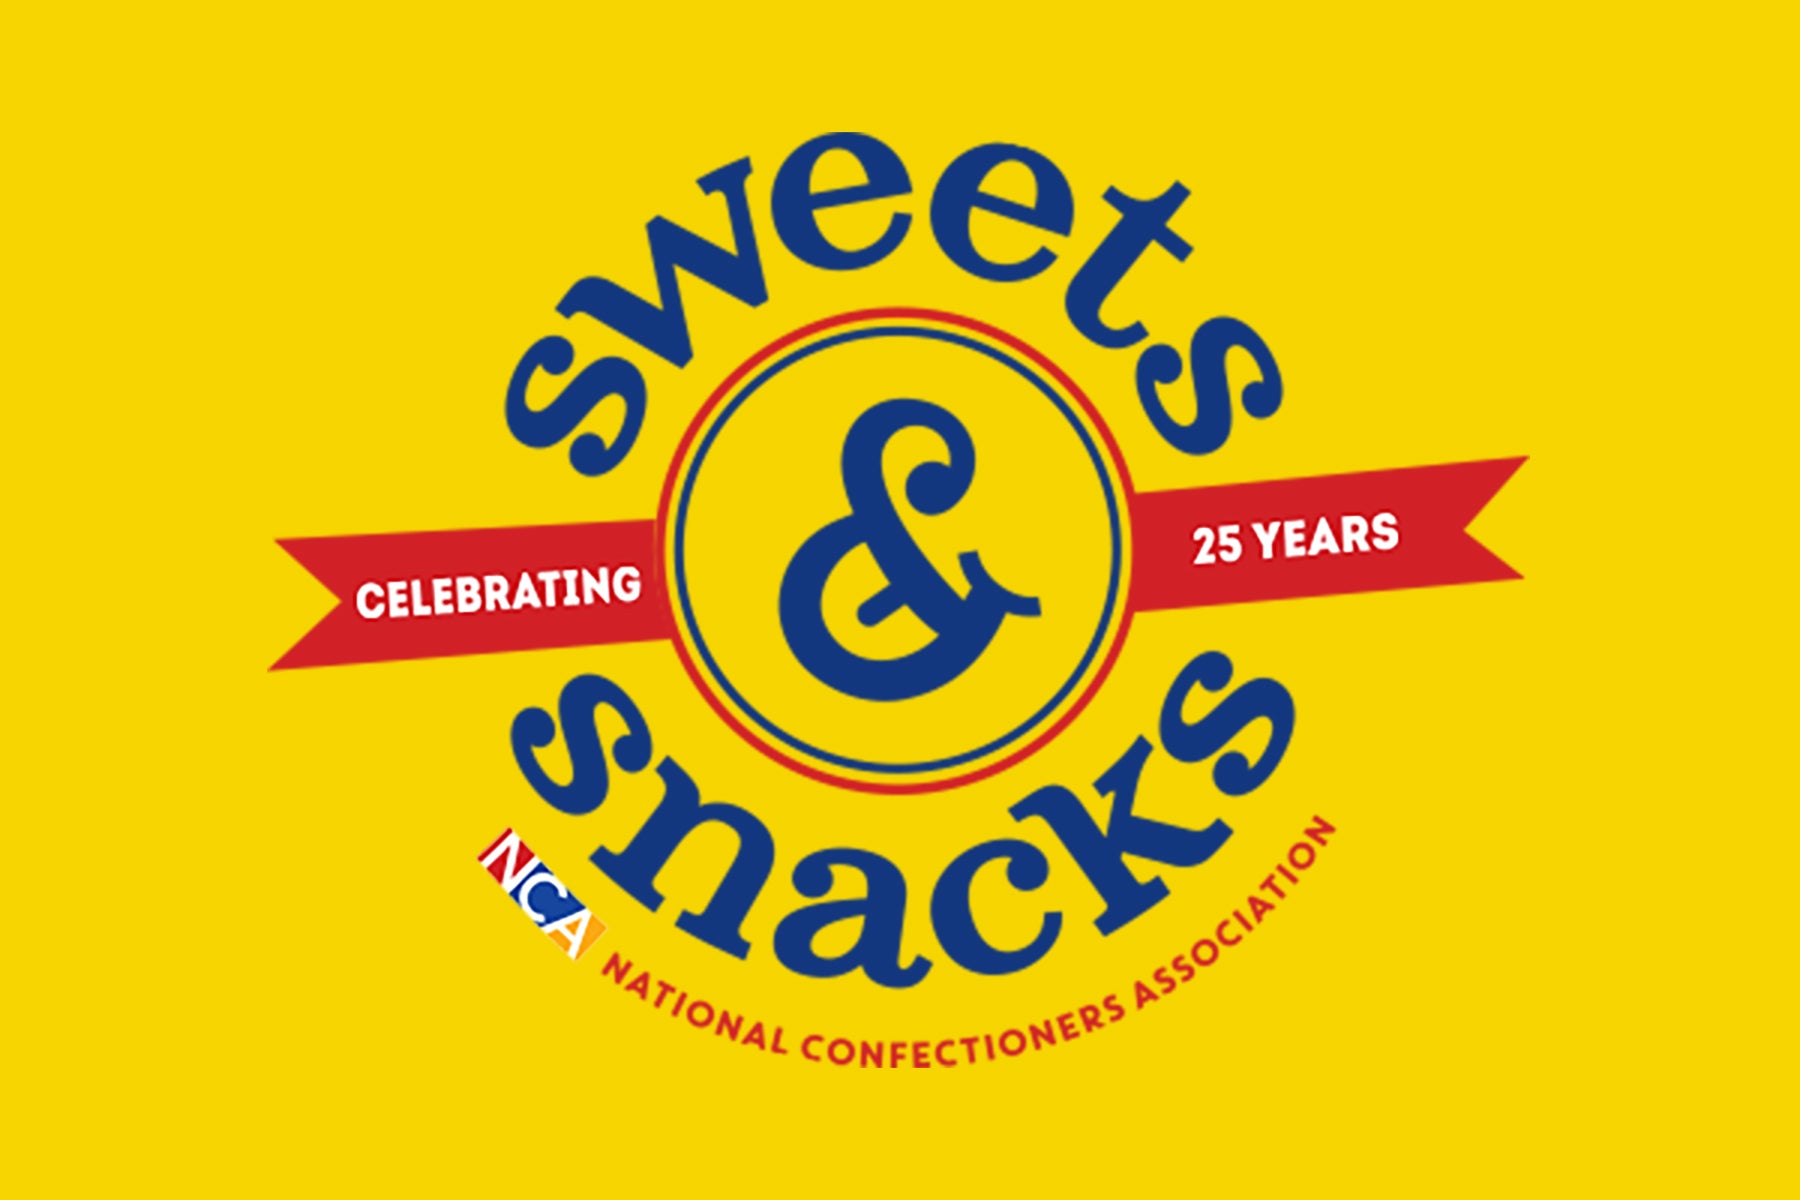 Old Trapper Announces Participation in 2023 Sweets & Snacks Show